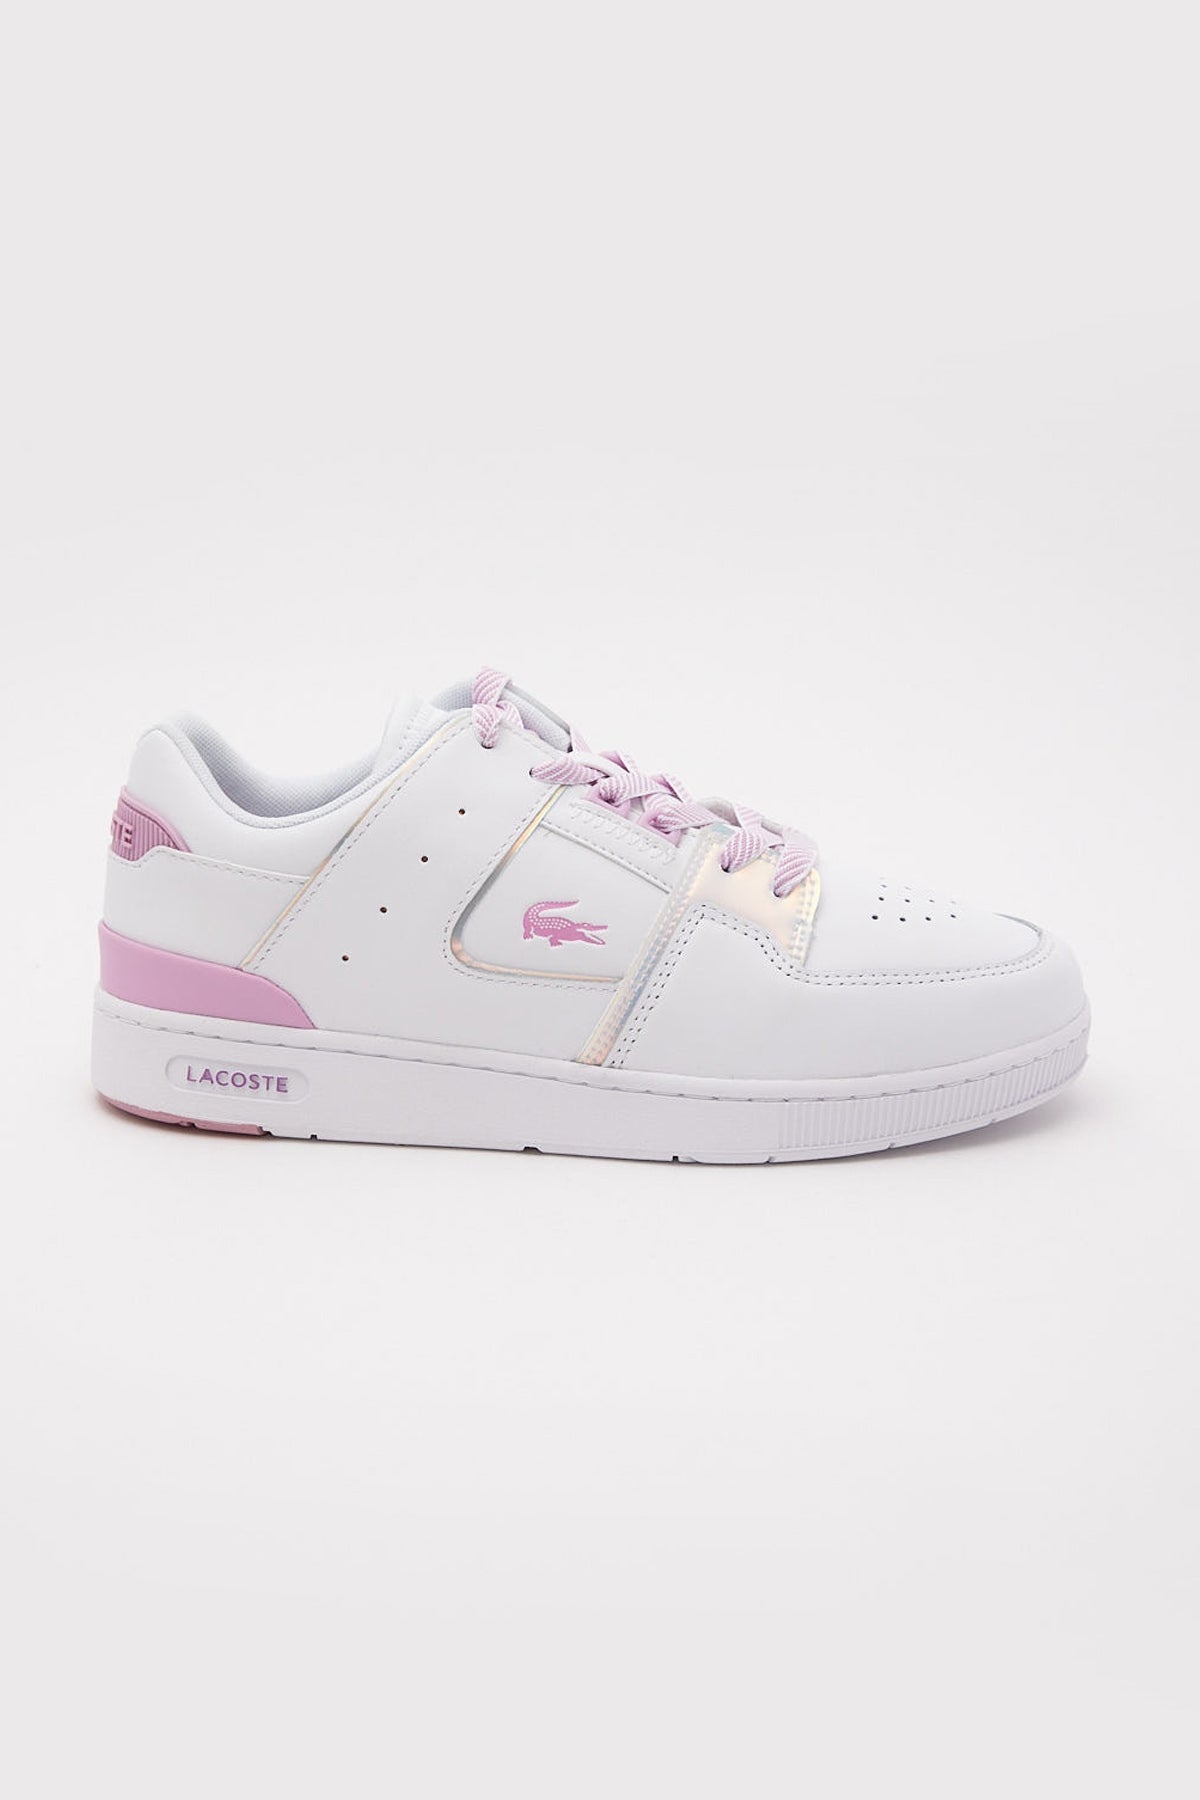 Lacoste Court Cage 222 5 SFA White / Pink